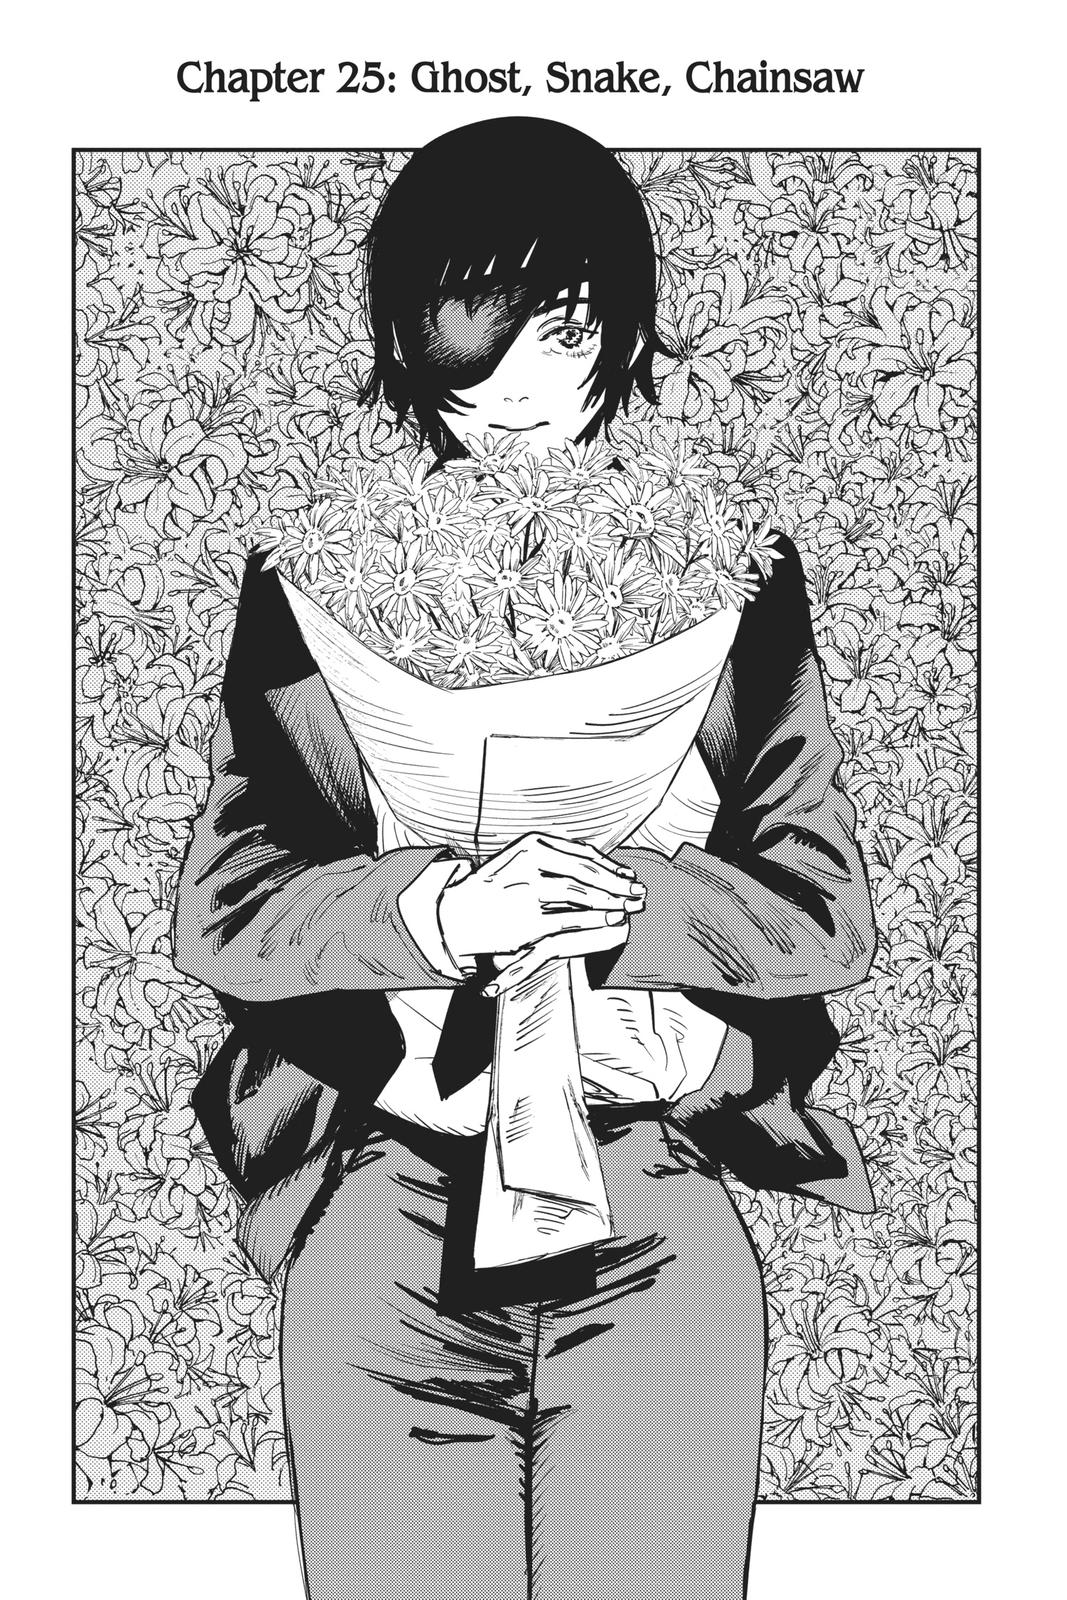 Himeno in Chainsaw Man: Story, personality, first appearance